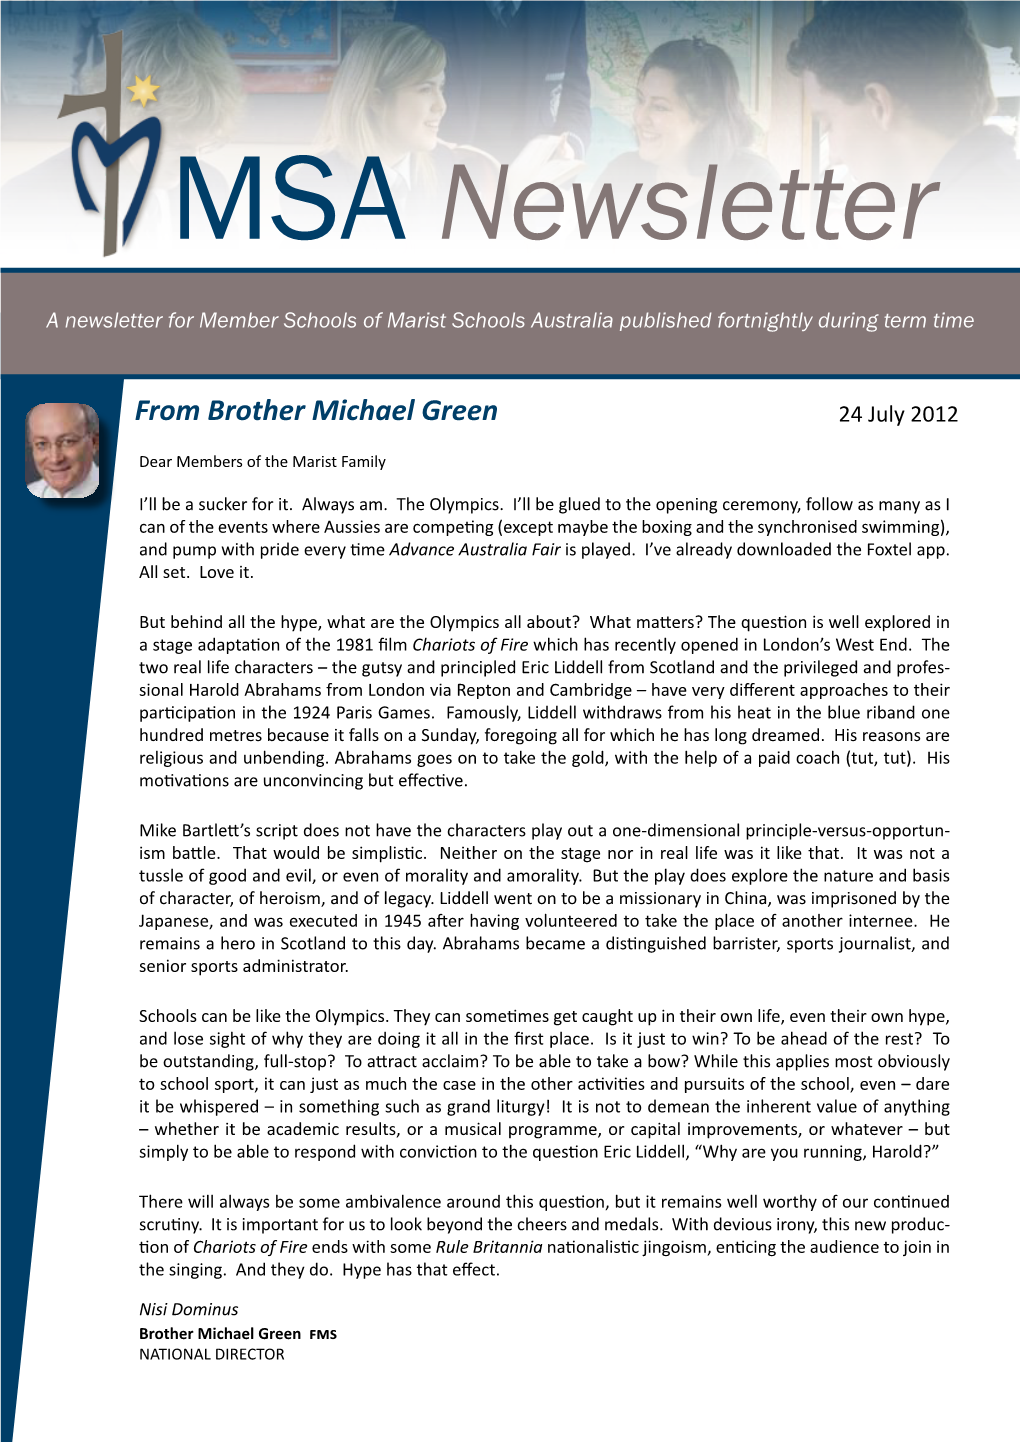 MSA Newsletter W a Newsletter for Member Schools of Marist Schools Australia Published Fortnightly During Term Time